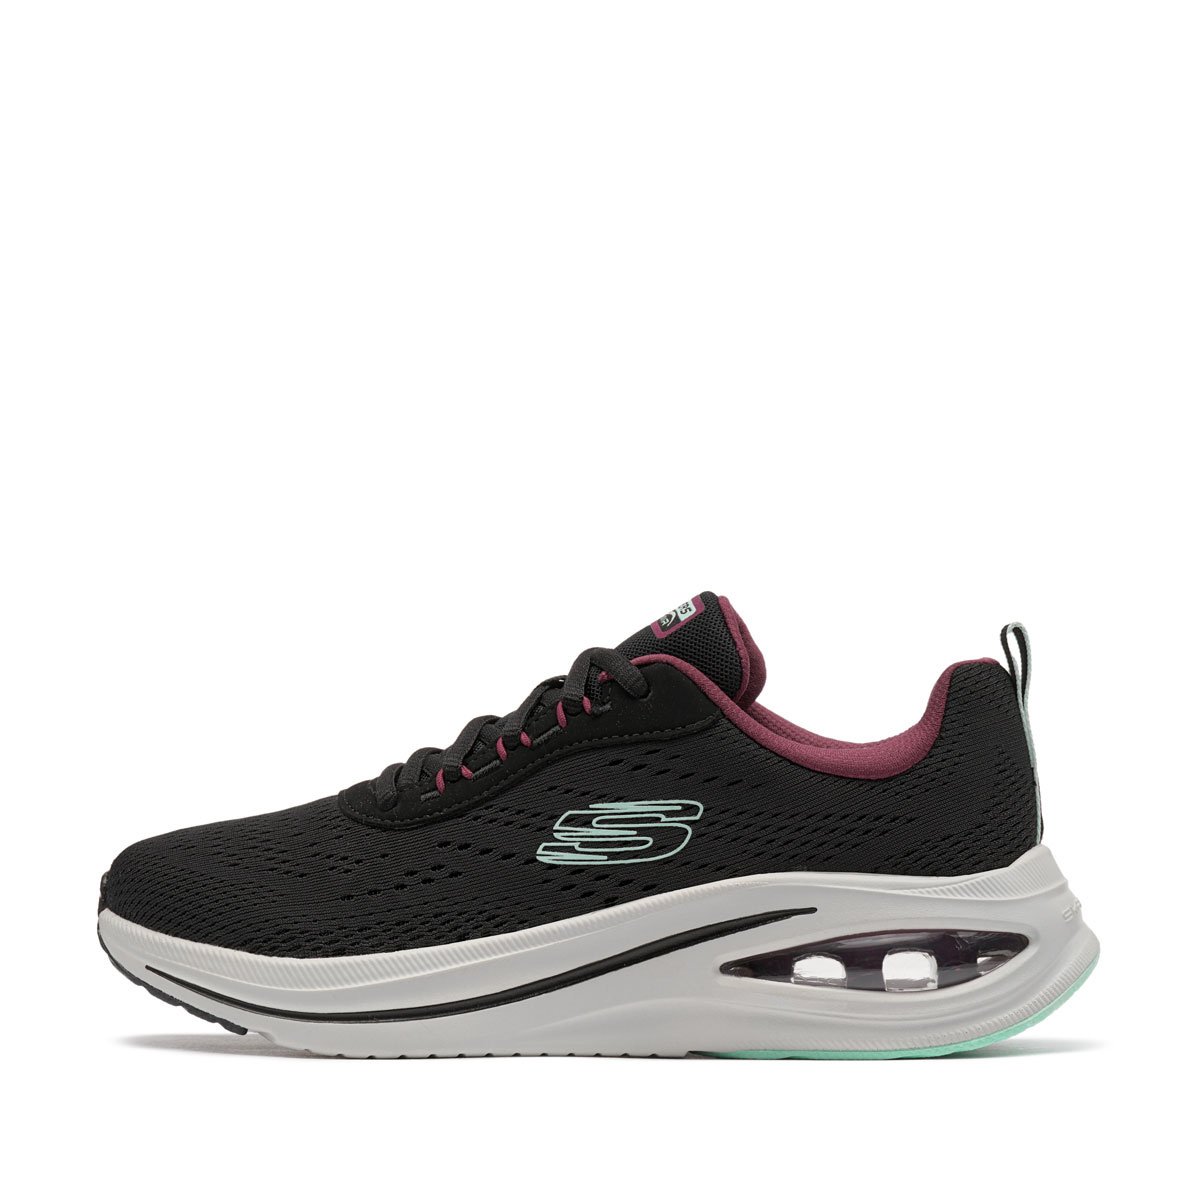 Skechers Skech-Air Meta-Aired Out Дамски маратонки 150131-BKMT